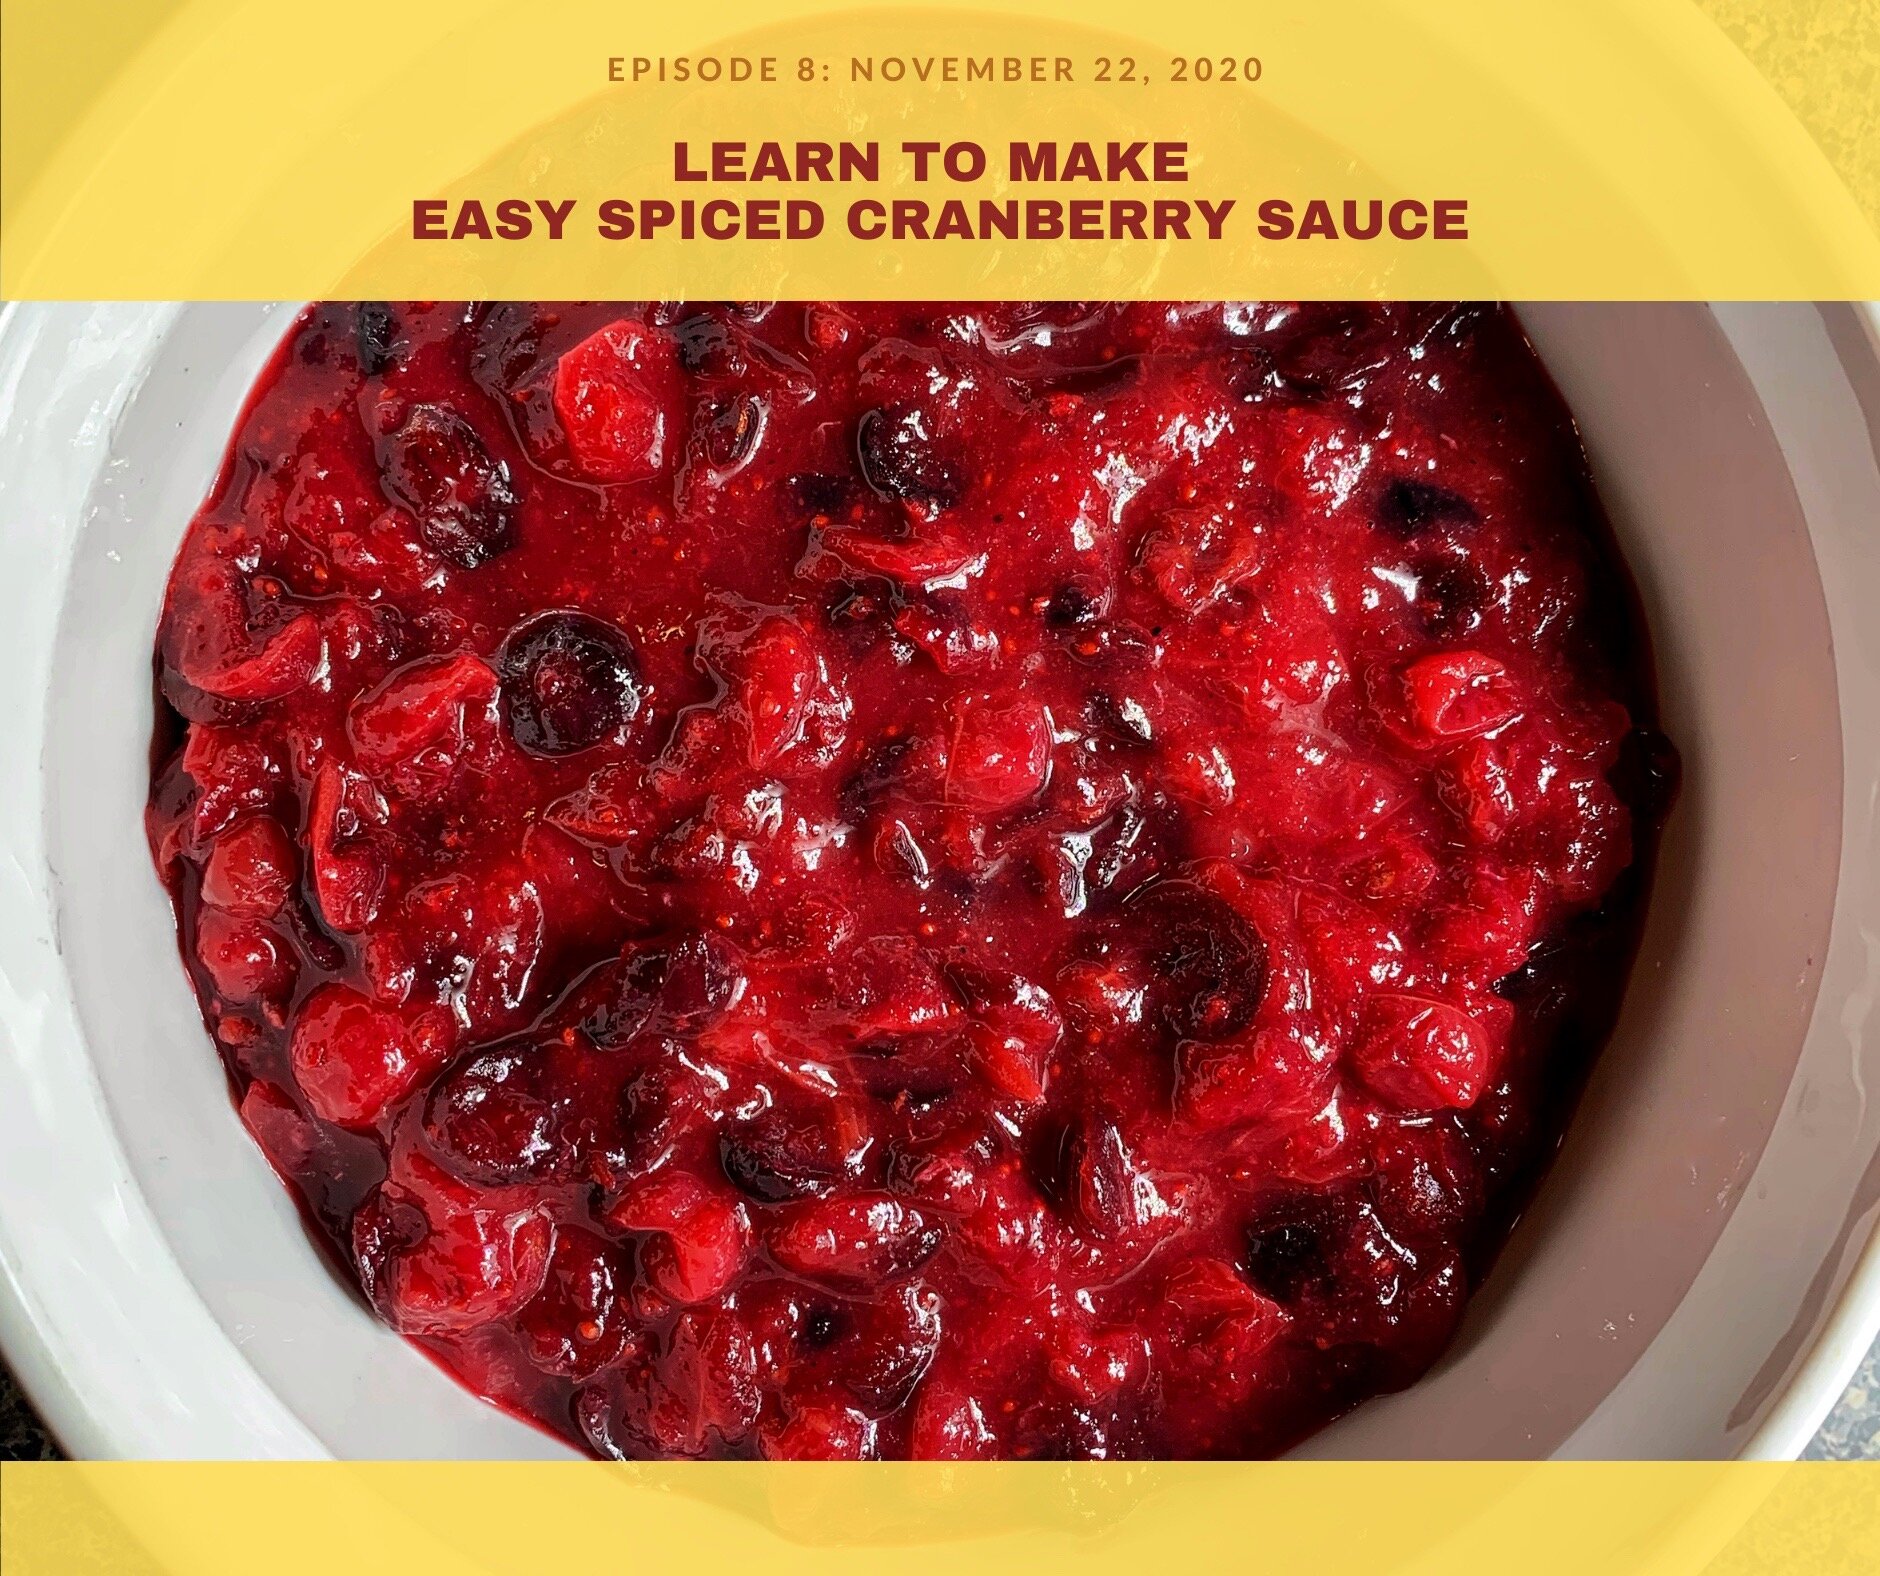 Spiced Cranberry Sauce Recipe: How to Make It